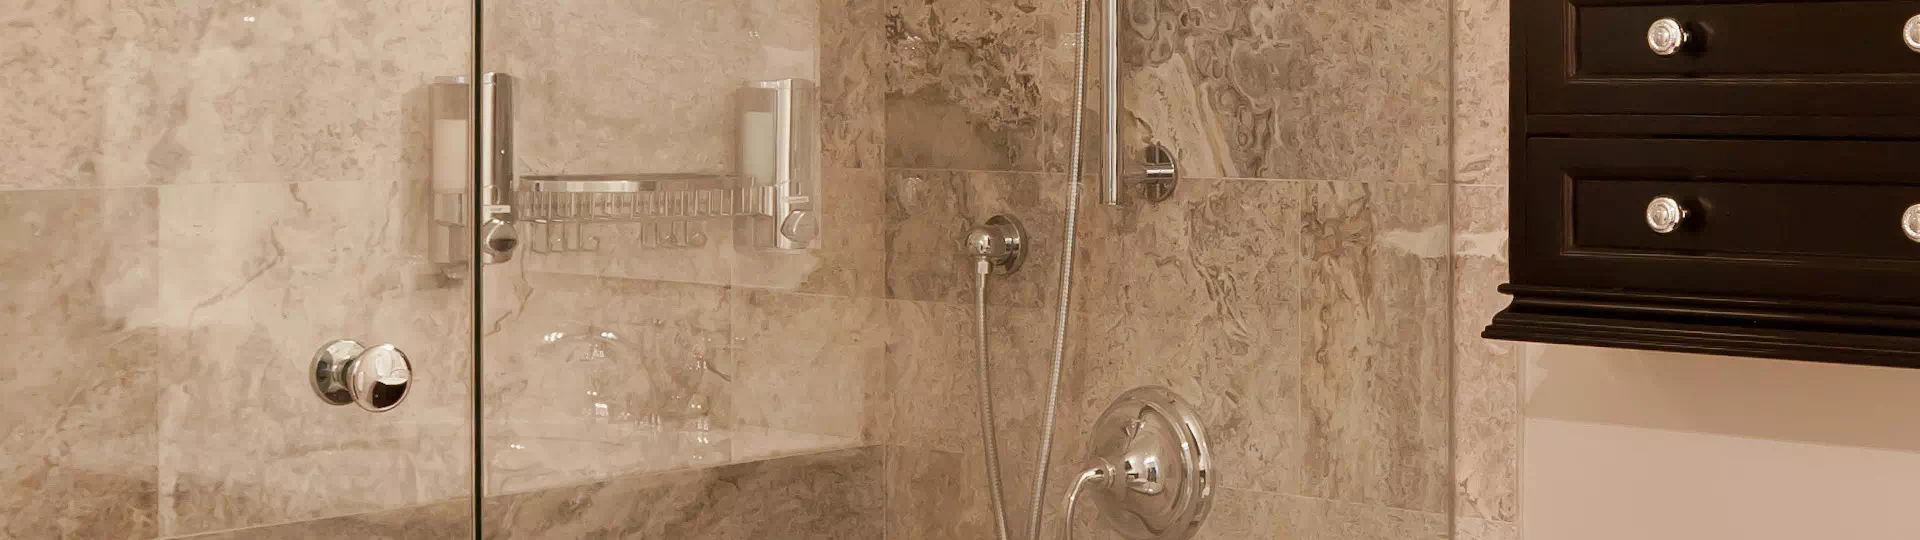 How To Clean Natural Stone Shower, Stone Bathroom Tiles Cleaning